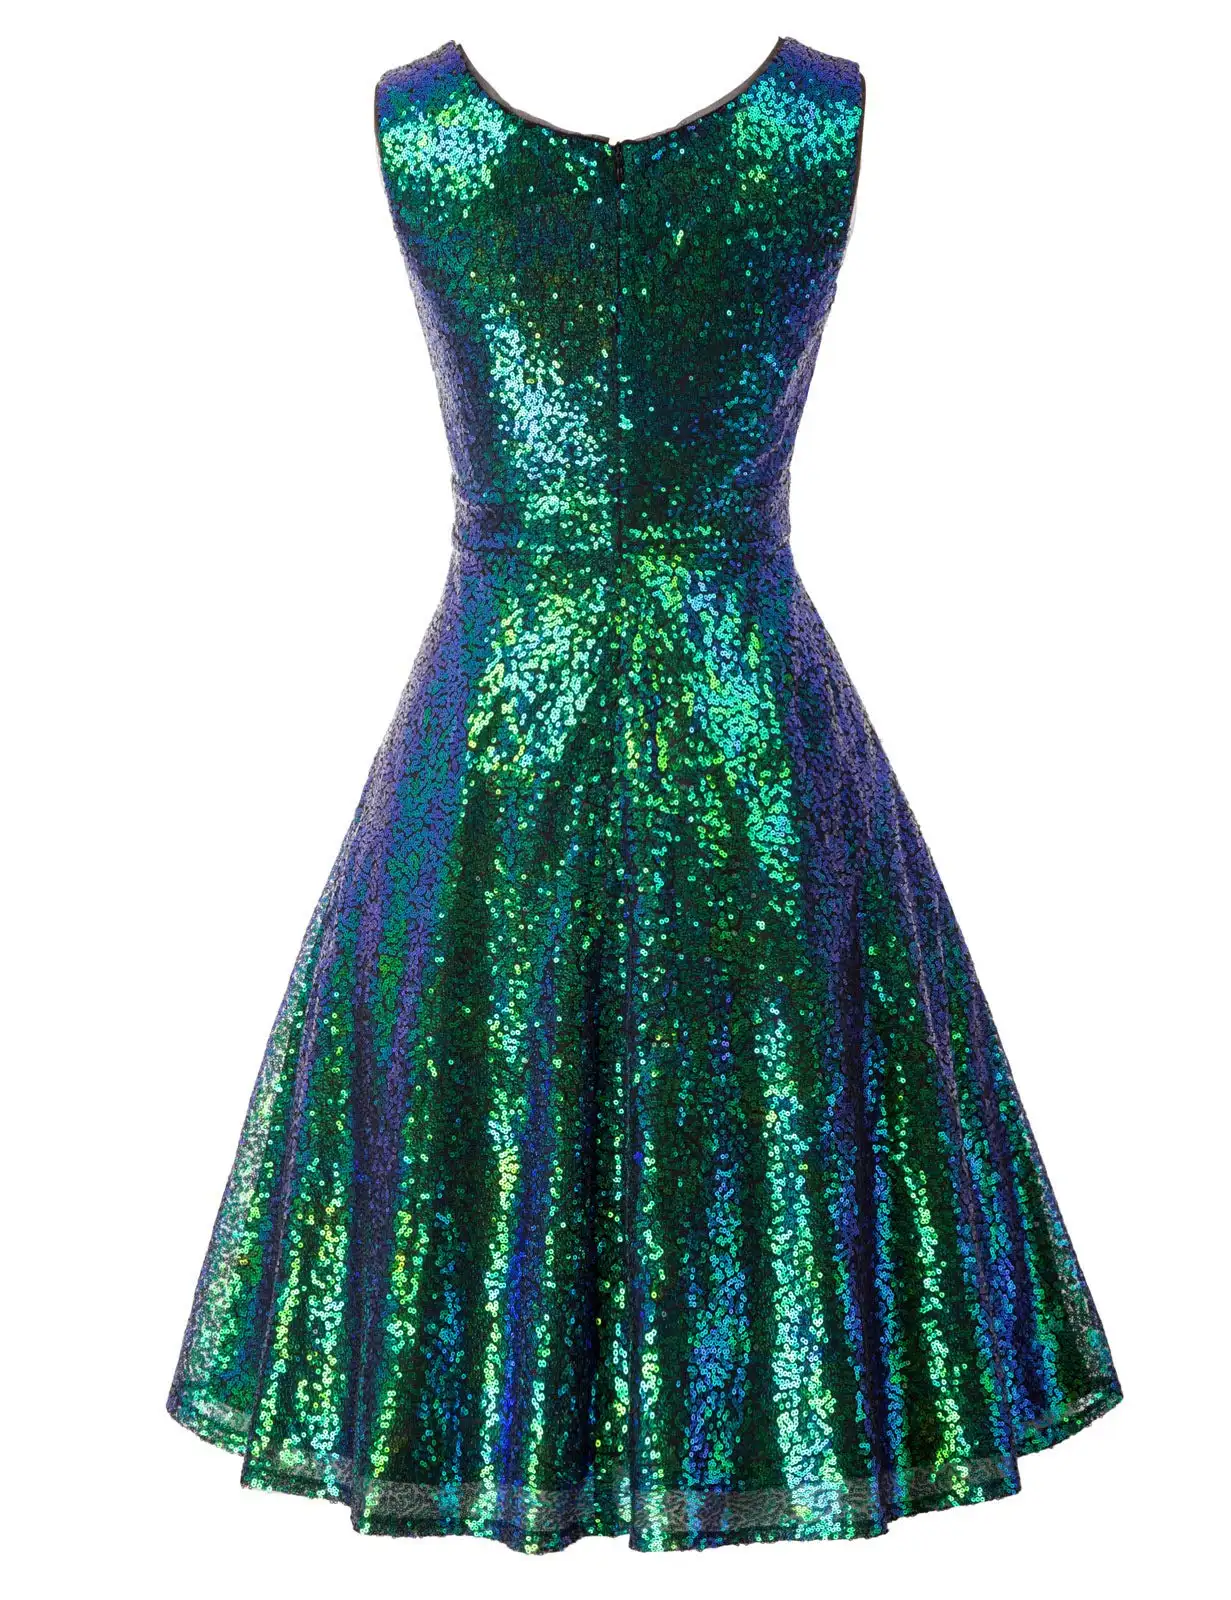 lady wears fashion corset glitter dress & skirts ruched bodycon plus size emerald green sequin hot dresses for sex women